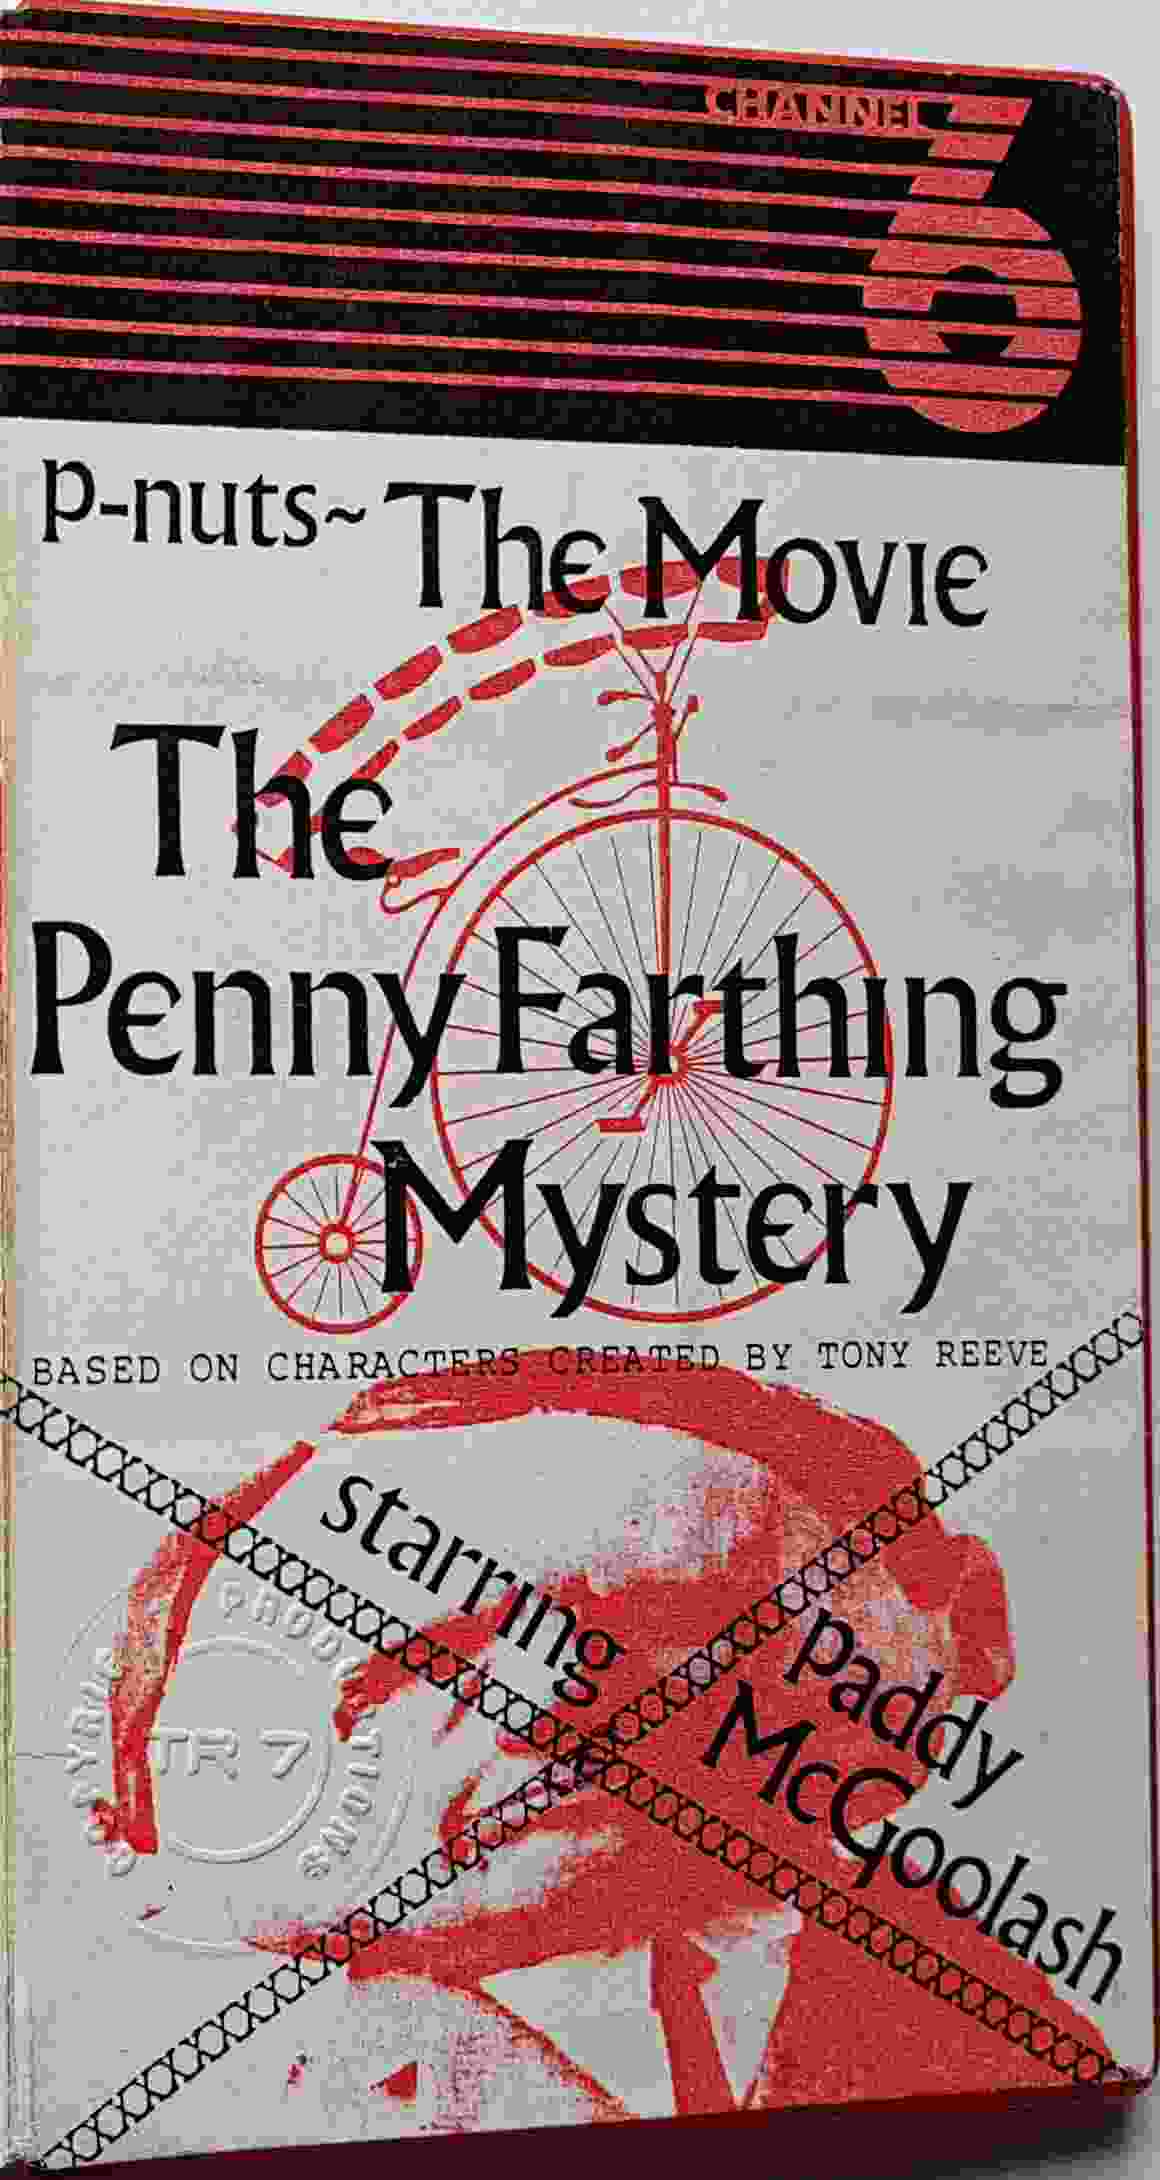 Picture of Paddy McGoolash - The penny farthing mystery by artist Unknown from ITV, Channel 4 and Channel 5 videos library